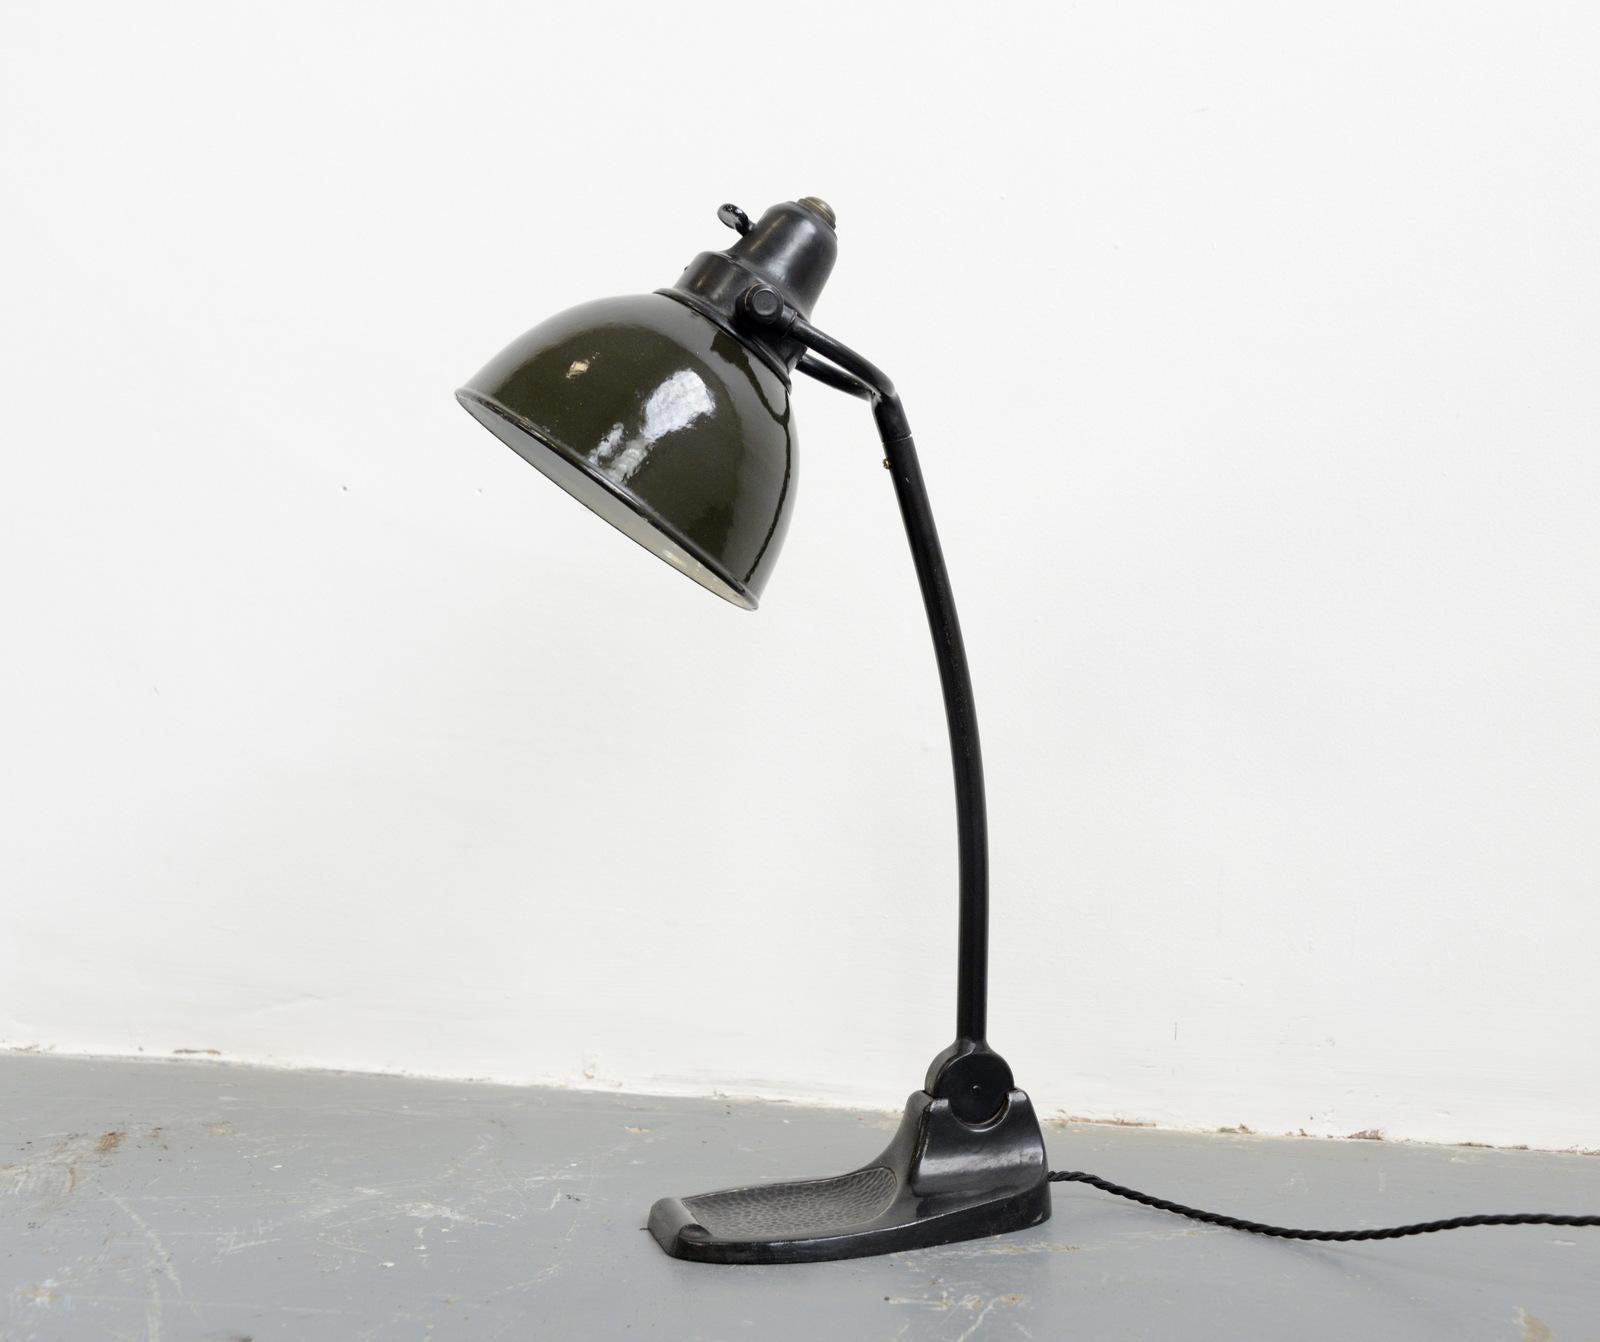 Desk Lamp By Bunte & Remmler, circa 1920s

- Vitreous Olive green shade
- Porcelain On/Off toggle switch
- Cast iron base with ashtray
- Takes E27 bulbs
- Made by Bunte & Remmler, Frankfurt
- German ~ 1920s
- 50cm tall x 20cm deep x 11cm